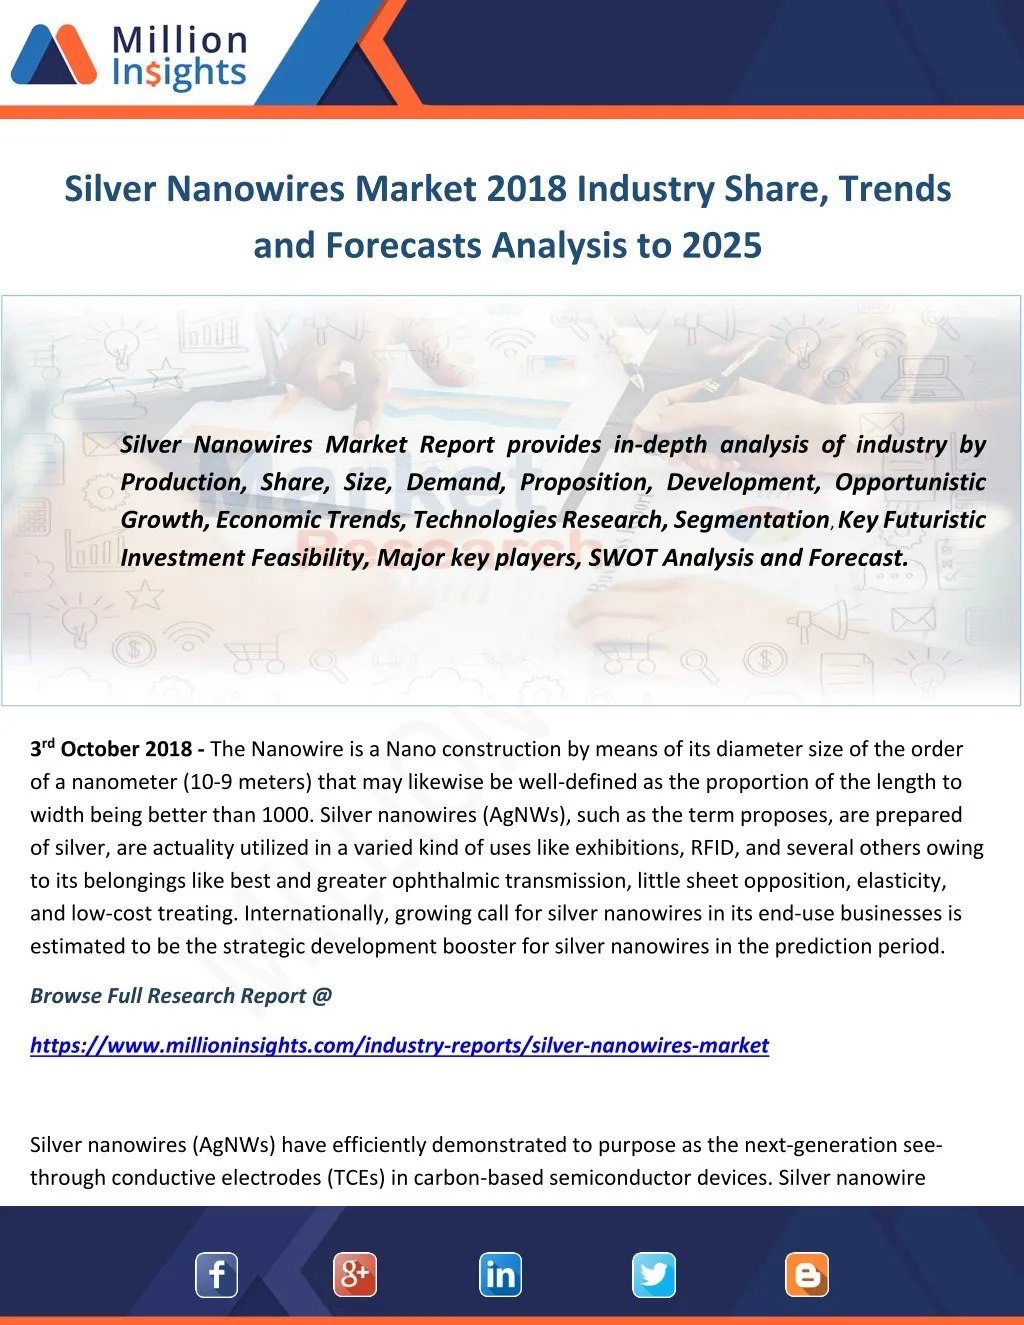 silver nanowires market 2018 industry share